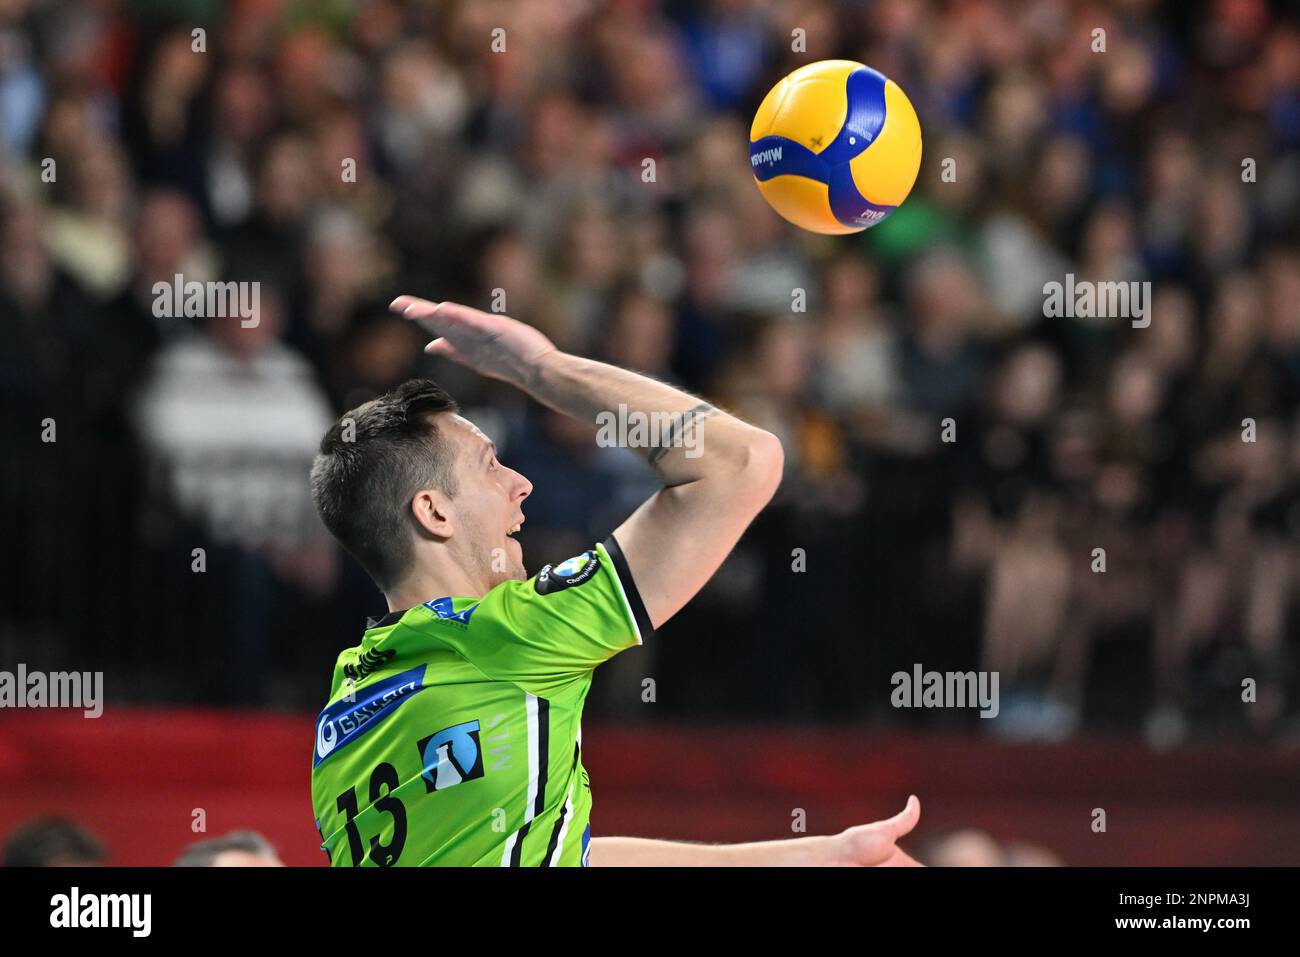 Menen's Arno Van De Velde pictured in action during the match between Knack Volley Roeselare and Decospan Volley Team Menen, the final match in the men Belgian volleyball cup competition, Sunday 26 February 2023 in Merksem, Antwerp. BELGA PHOTO DAVID CATRY Stock Photo